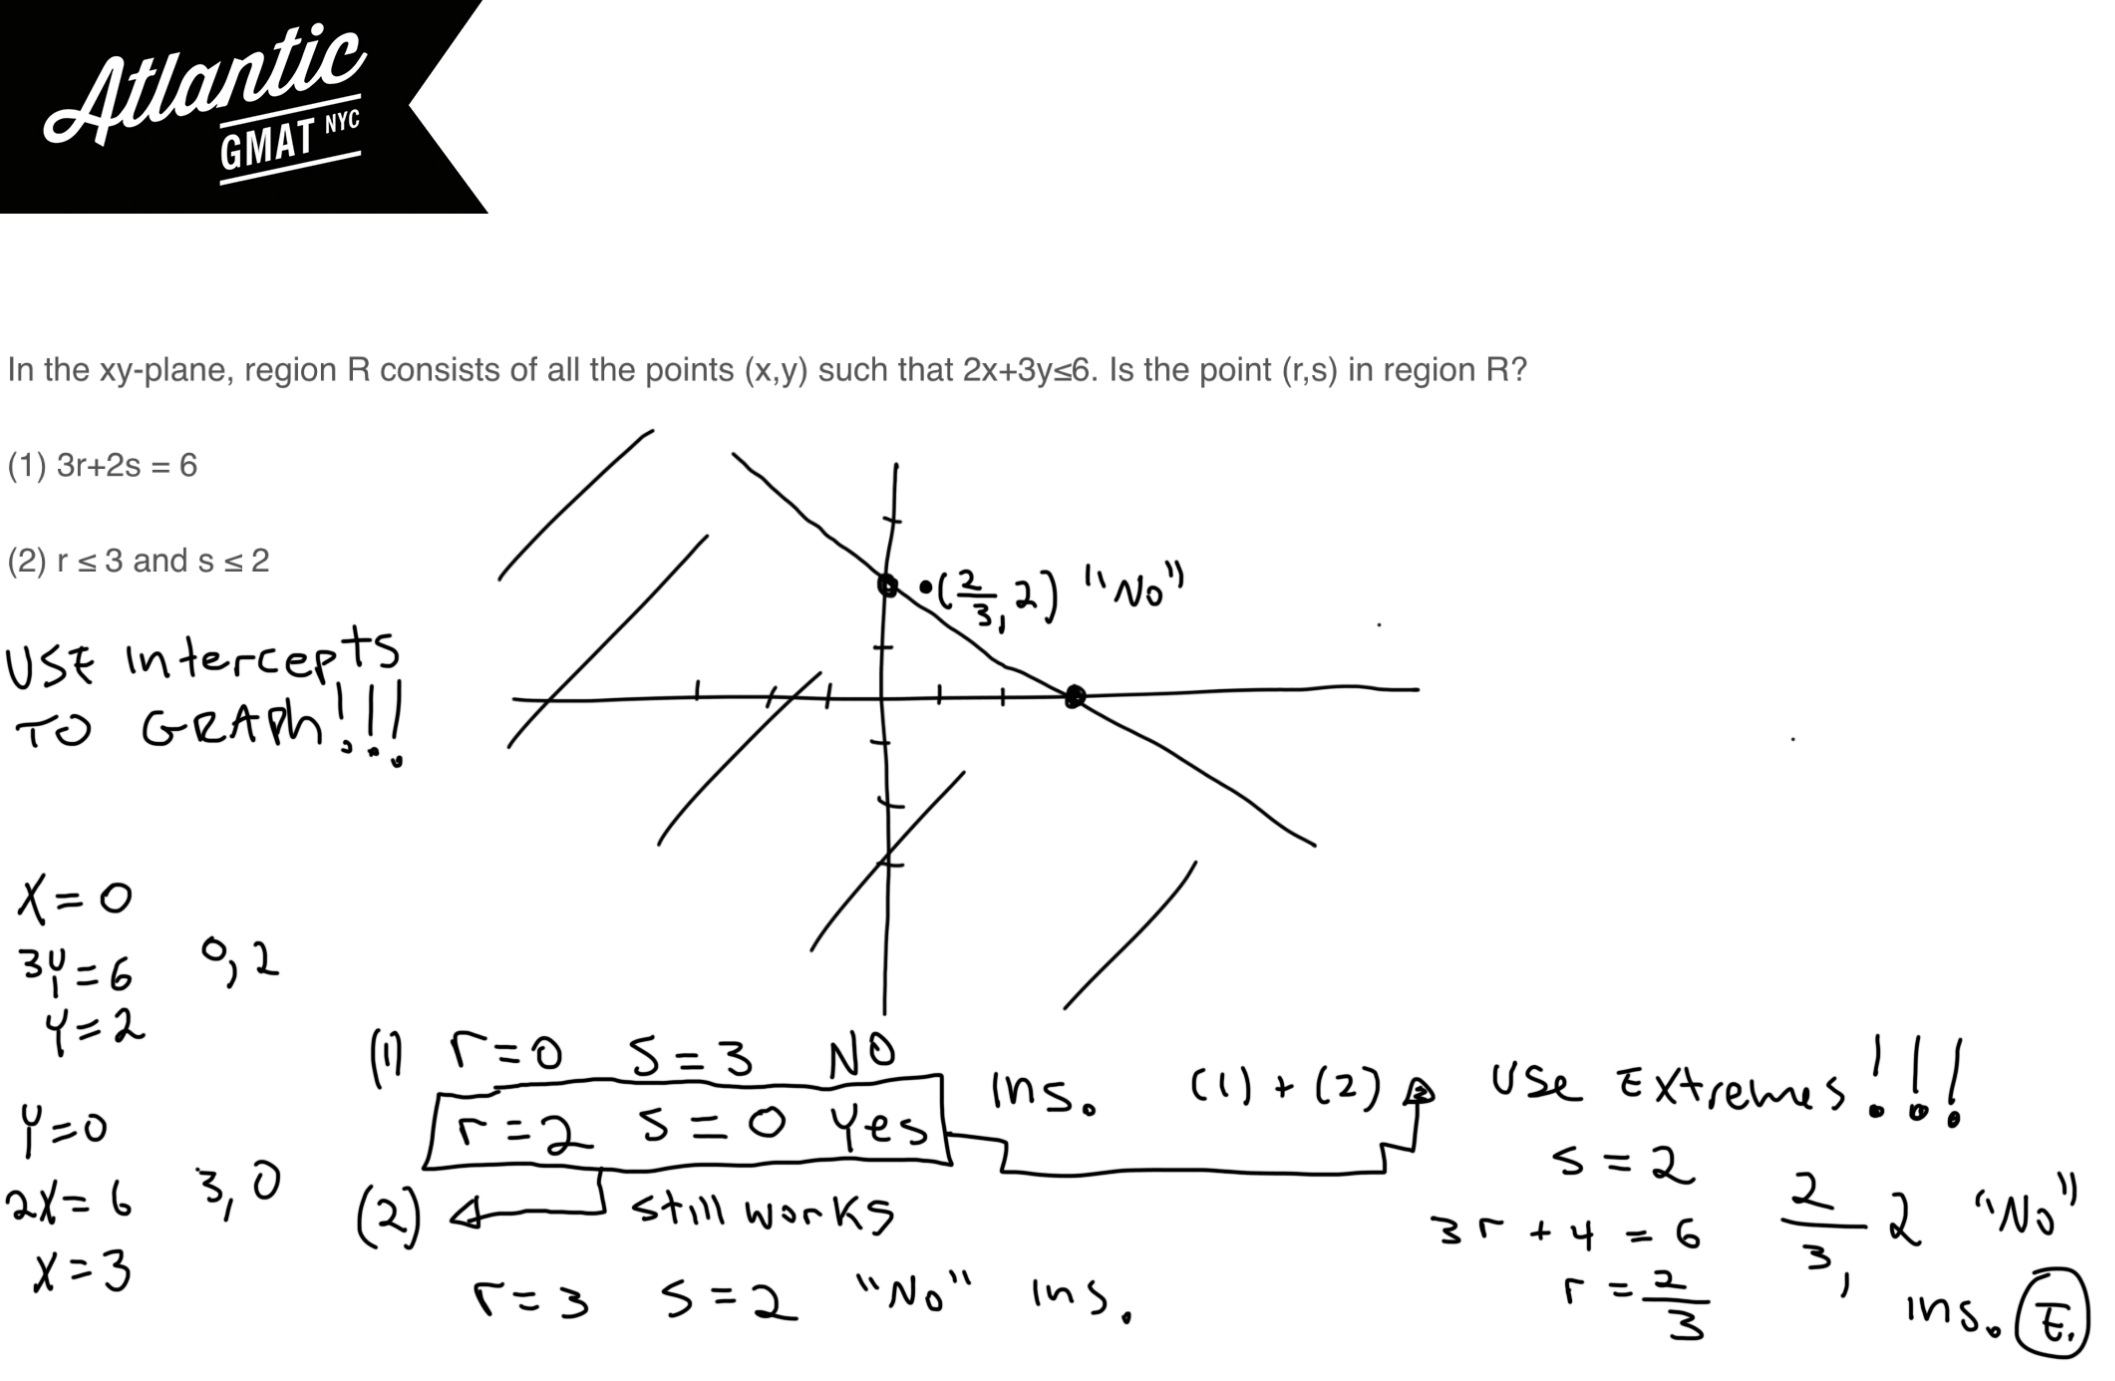 in the xy-plane, region r consists of all the points (x,y) such that 2x + 3y ≤ 6 gmat explanation 4